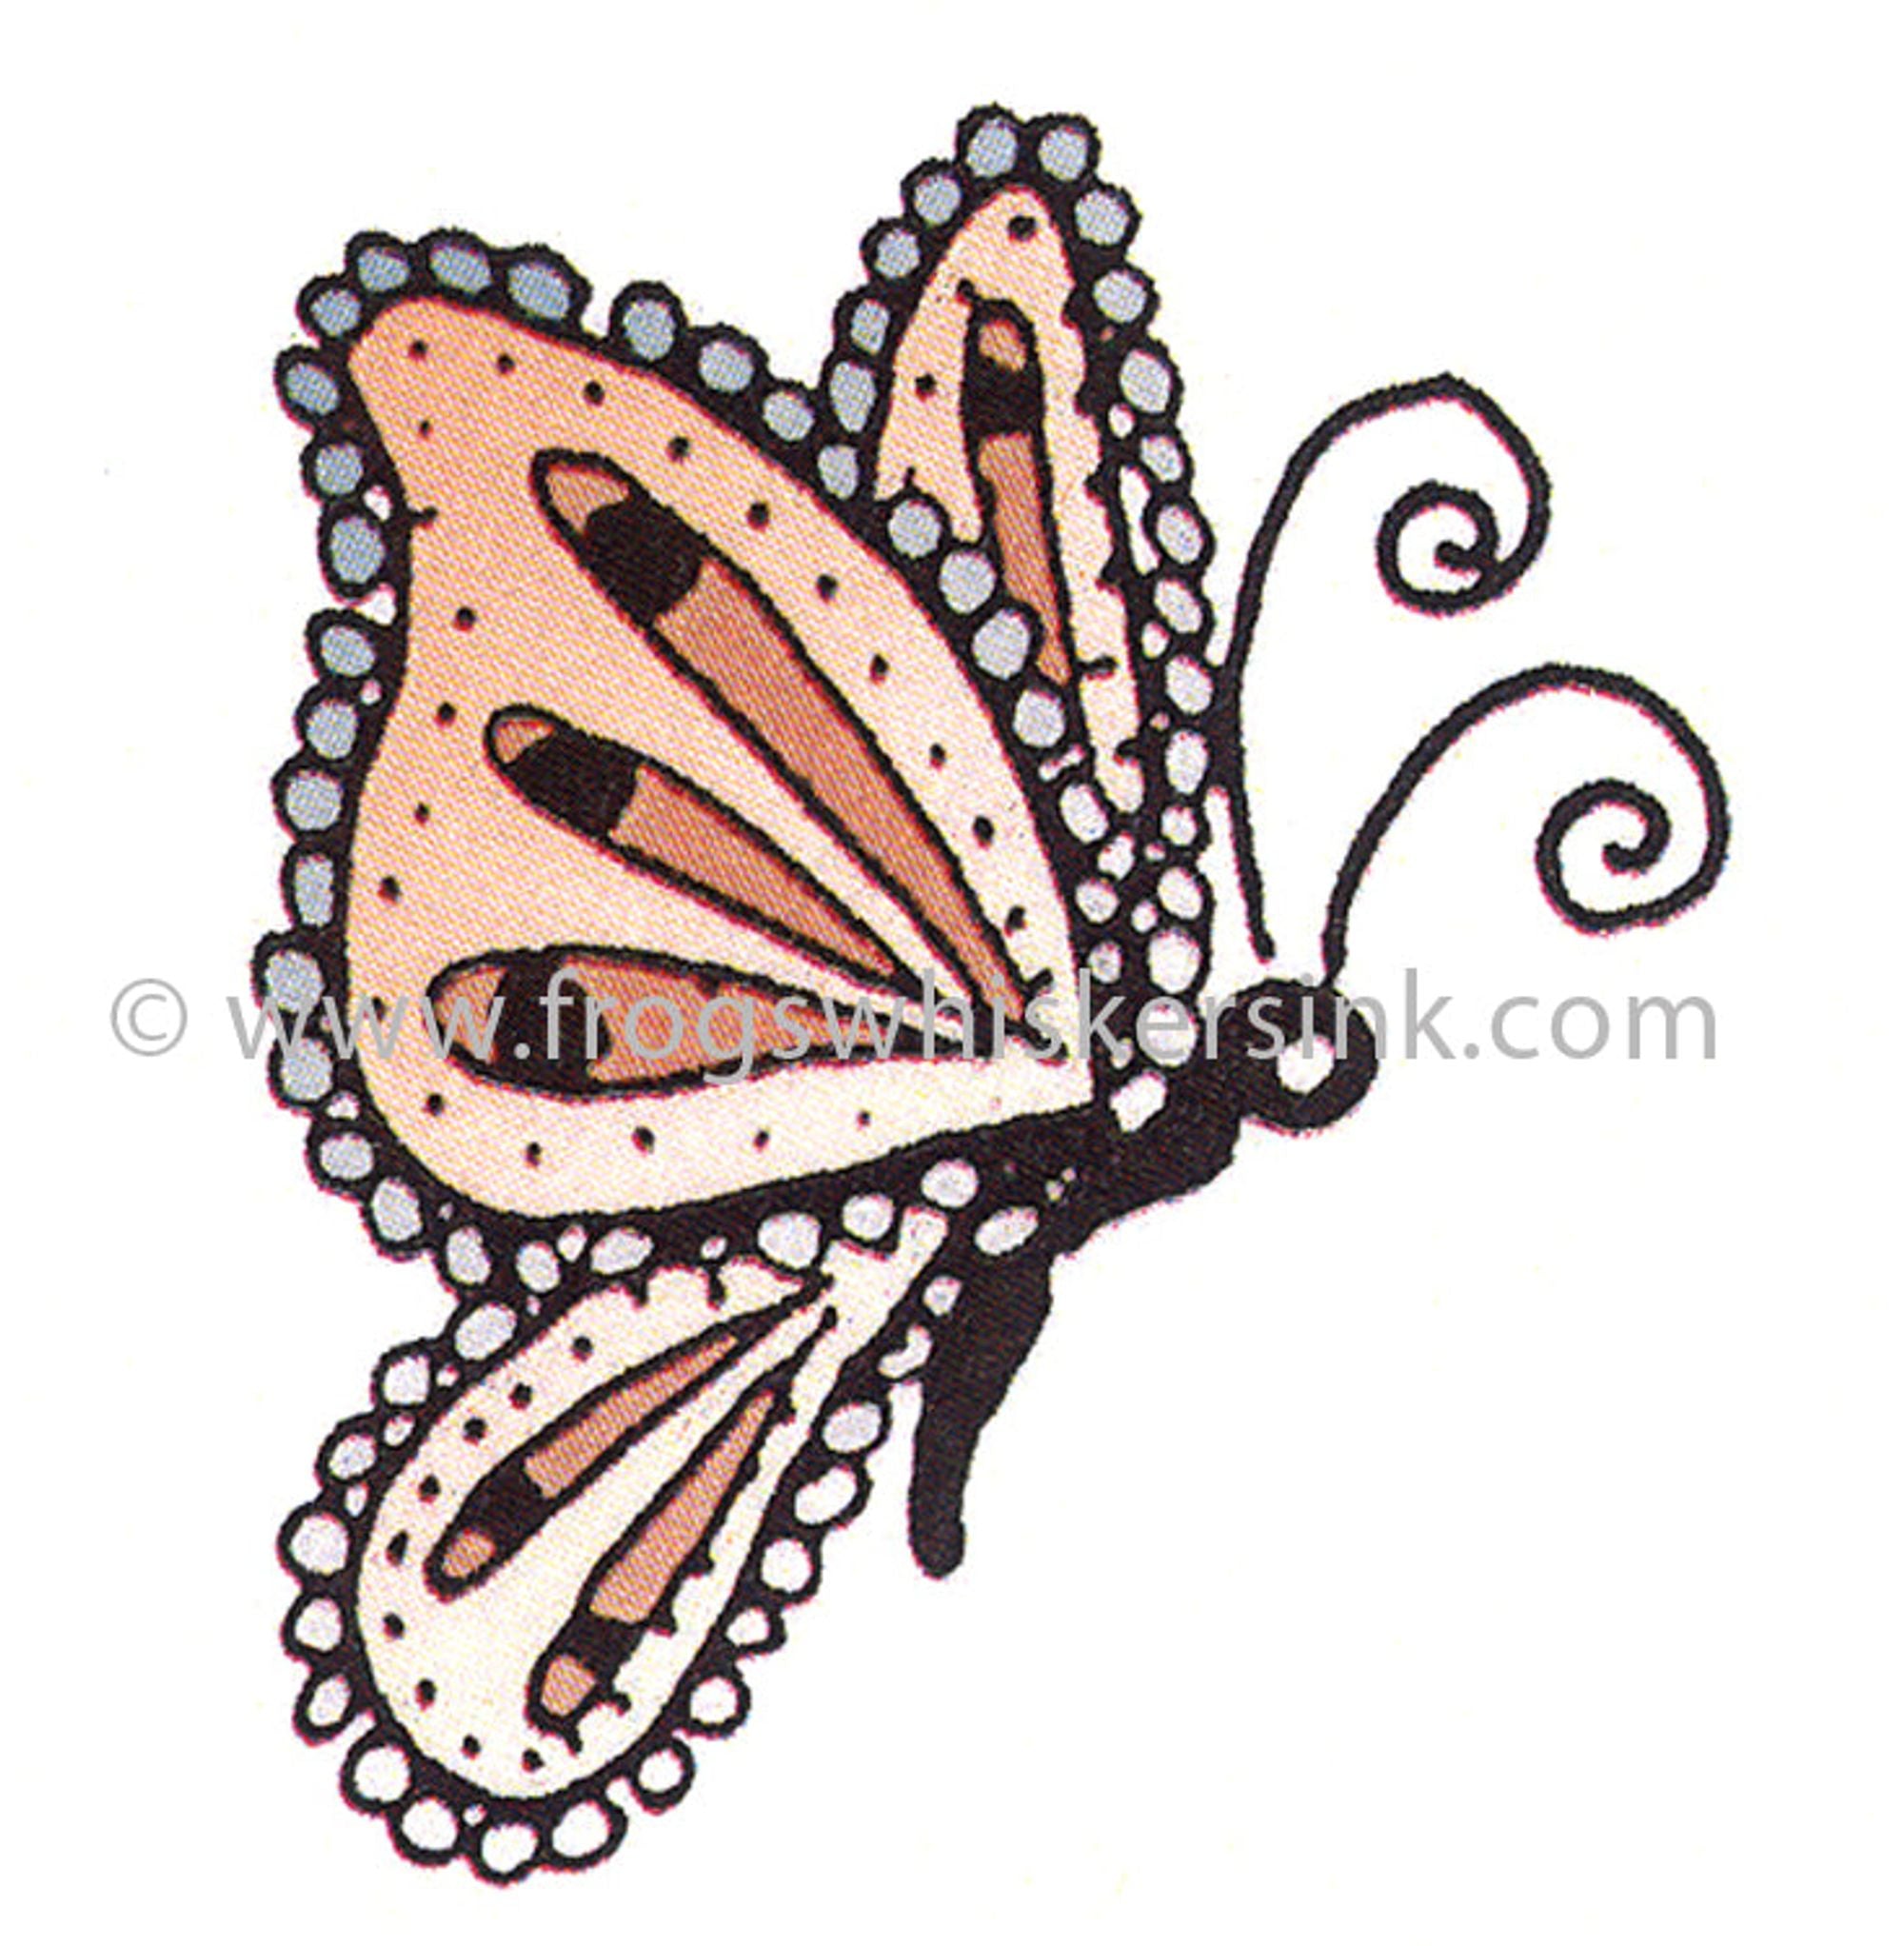 Frog's Whiskers Ink Stamps -Butterfly Right Cling Mount Stamp